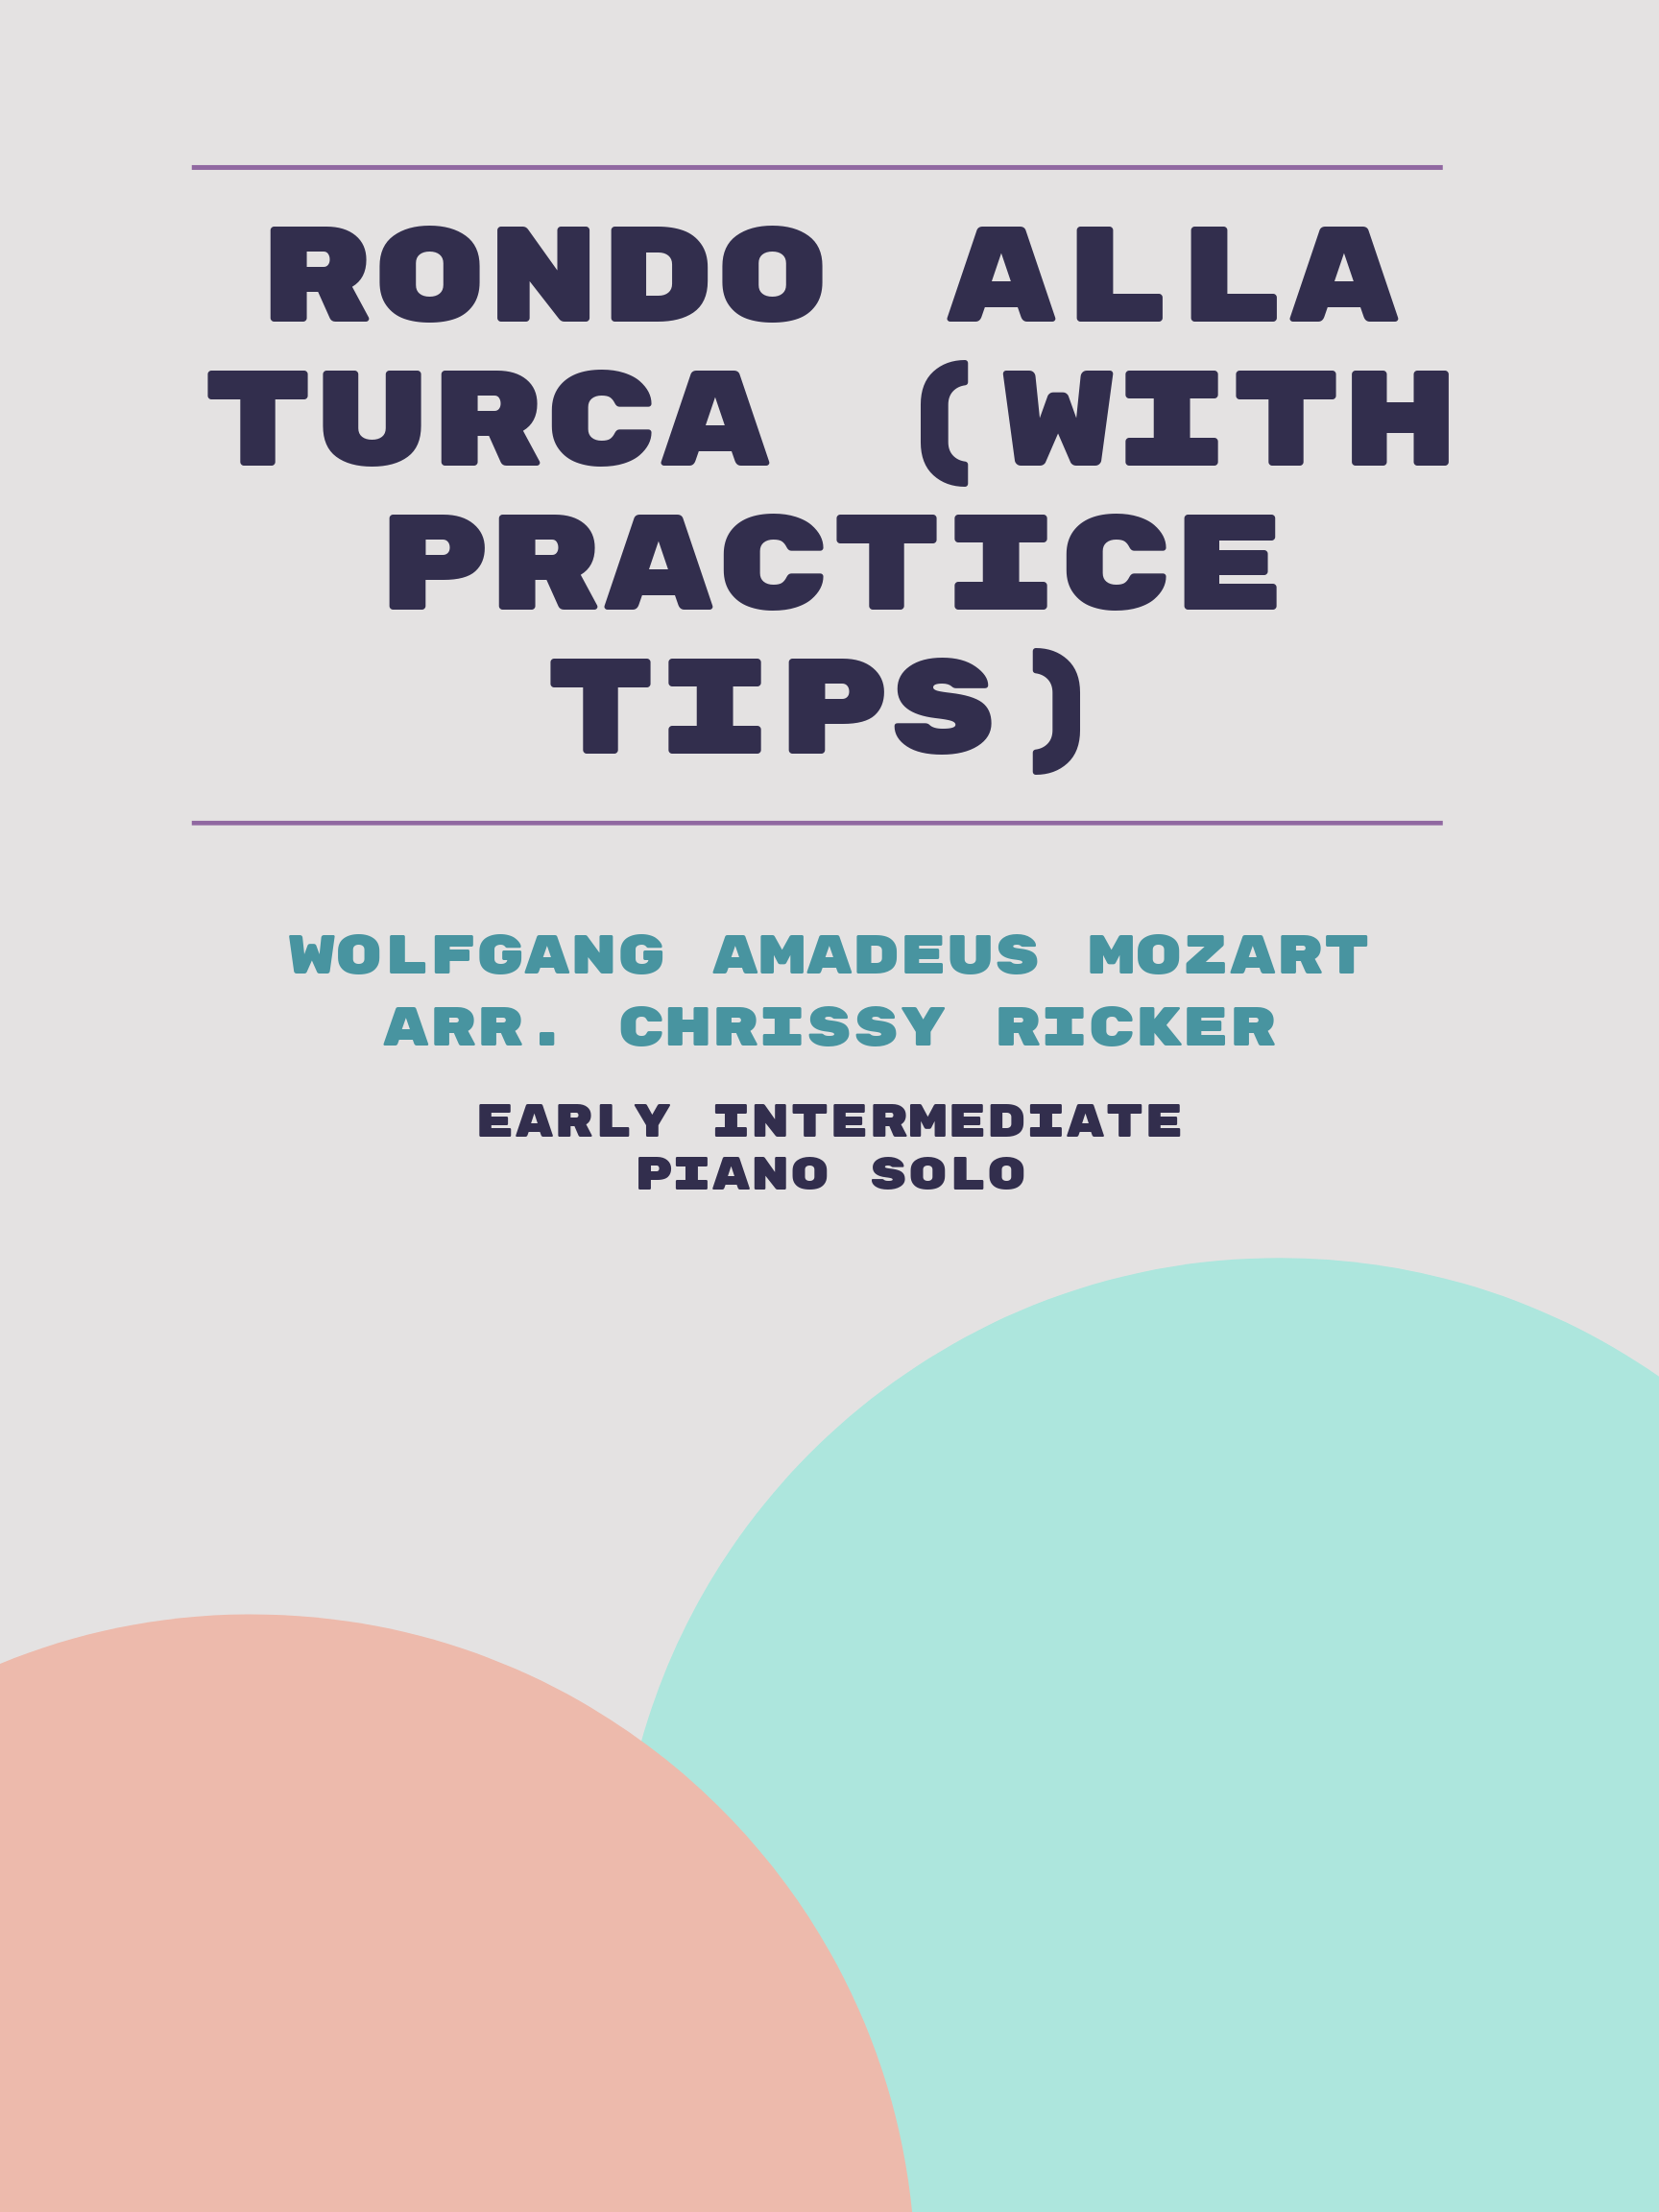 Rondo alla Turca (with practice tips) by Wolfgang Amadeus Mozart